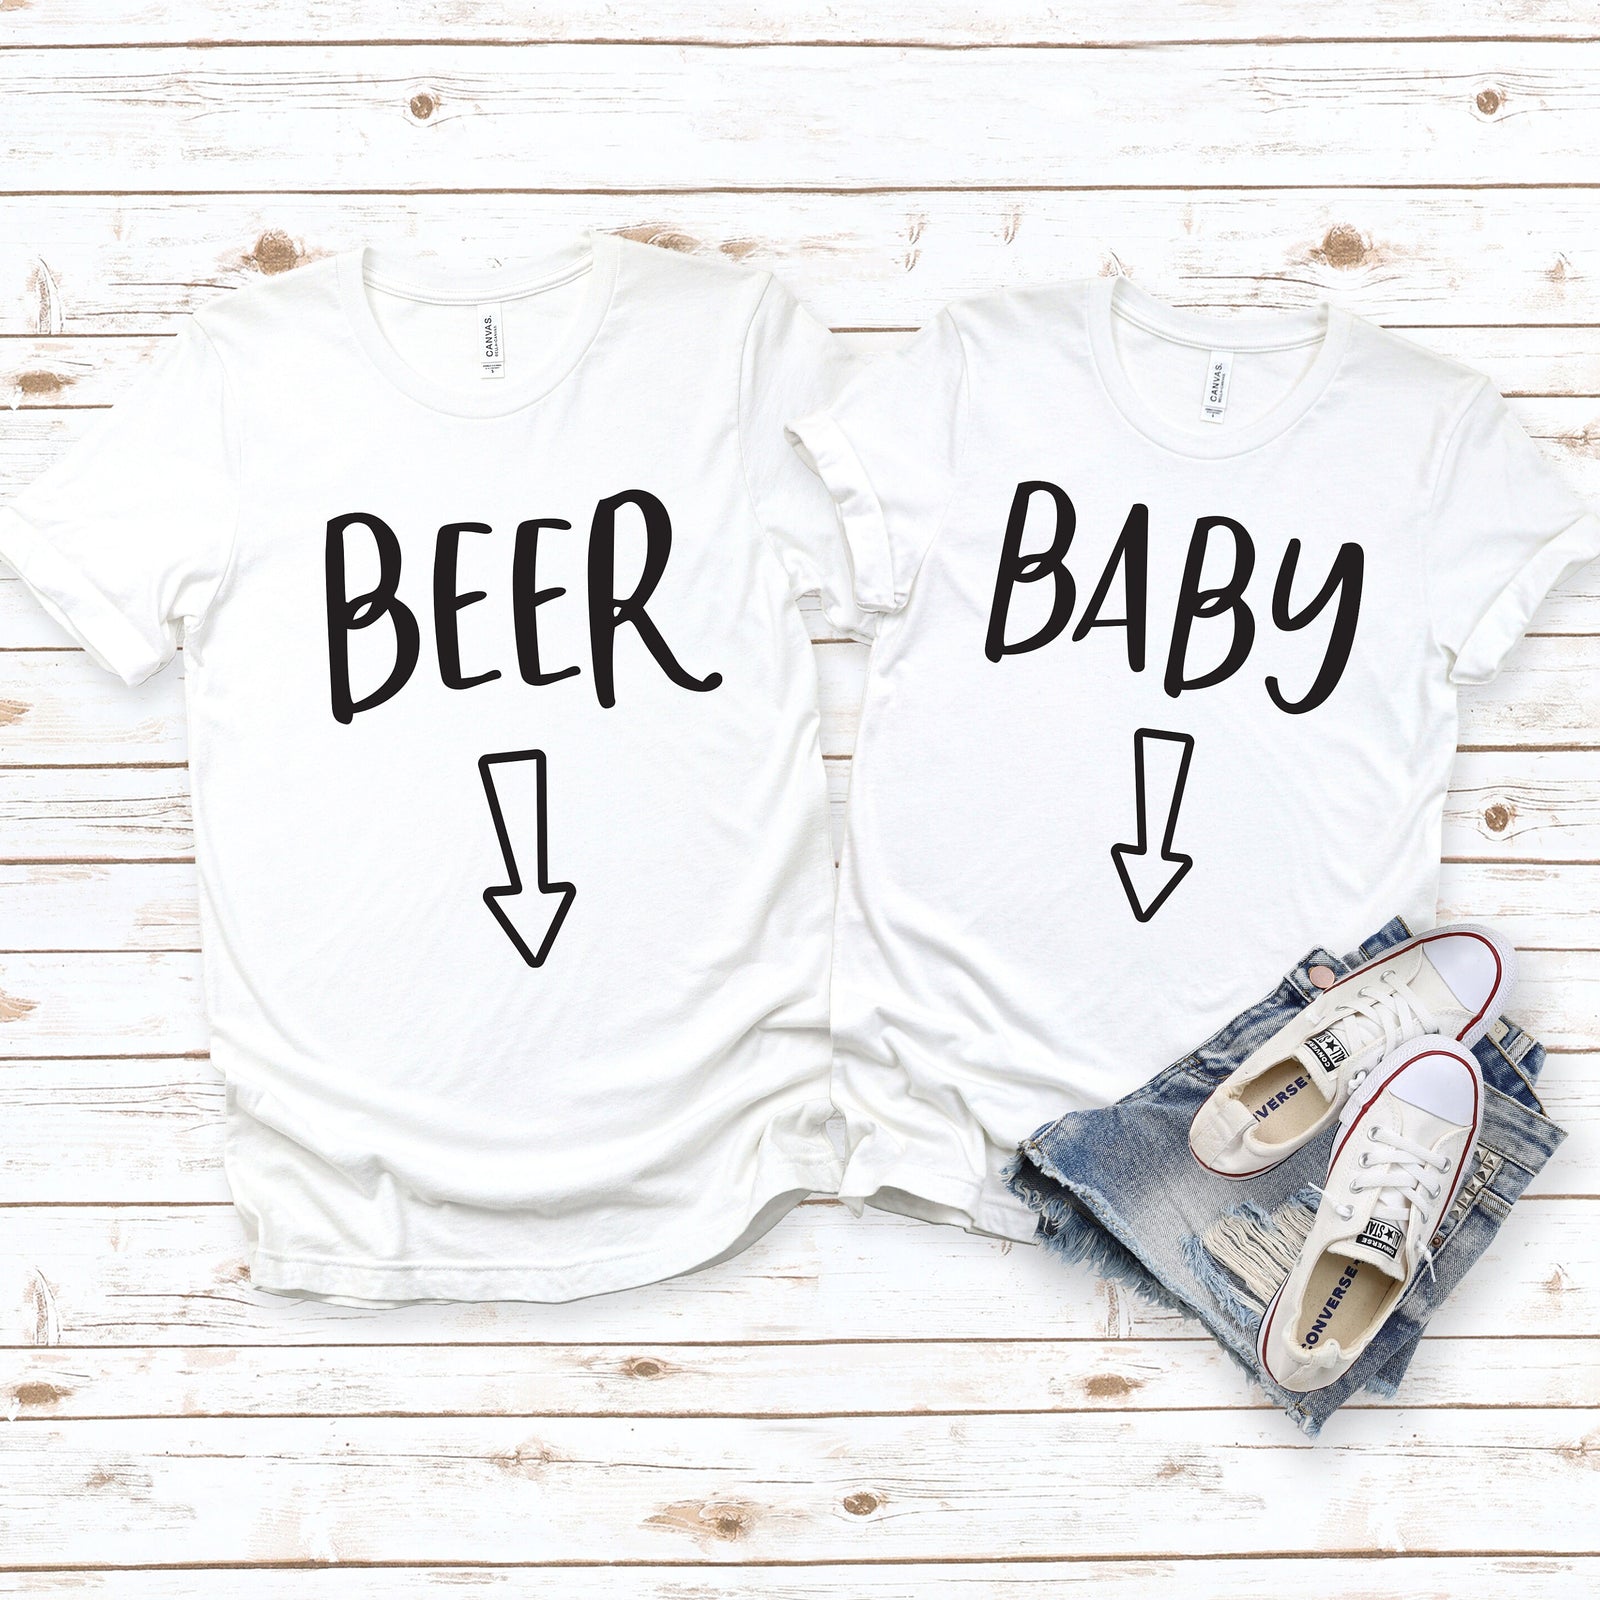 Baby and Beer T Shirts -Matching Shirts - Cute Pregnancy Announcement - Funny Shirts - Parents to Be Matching